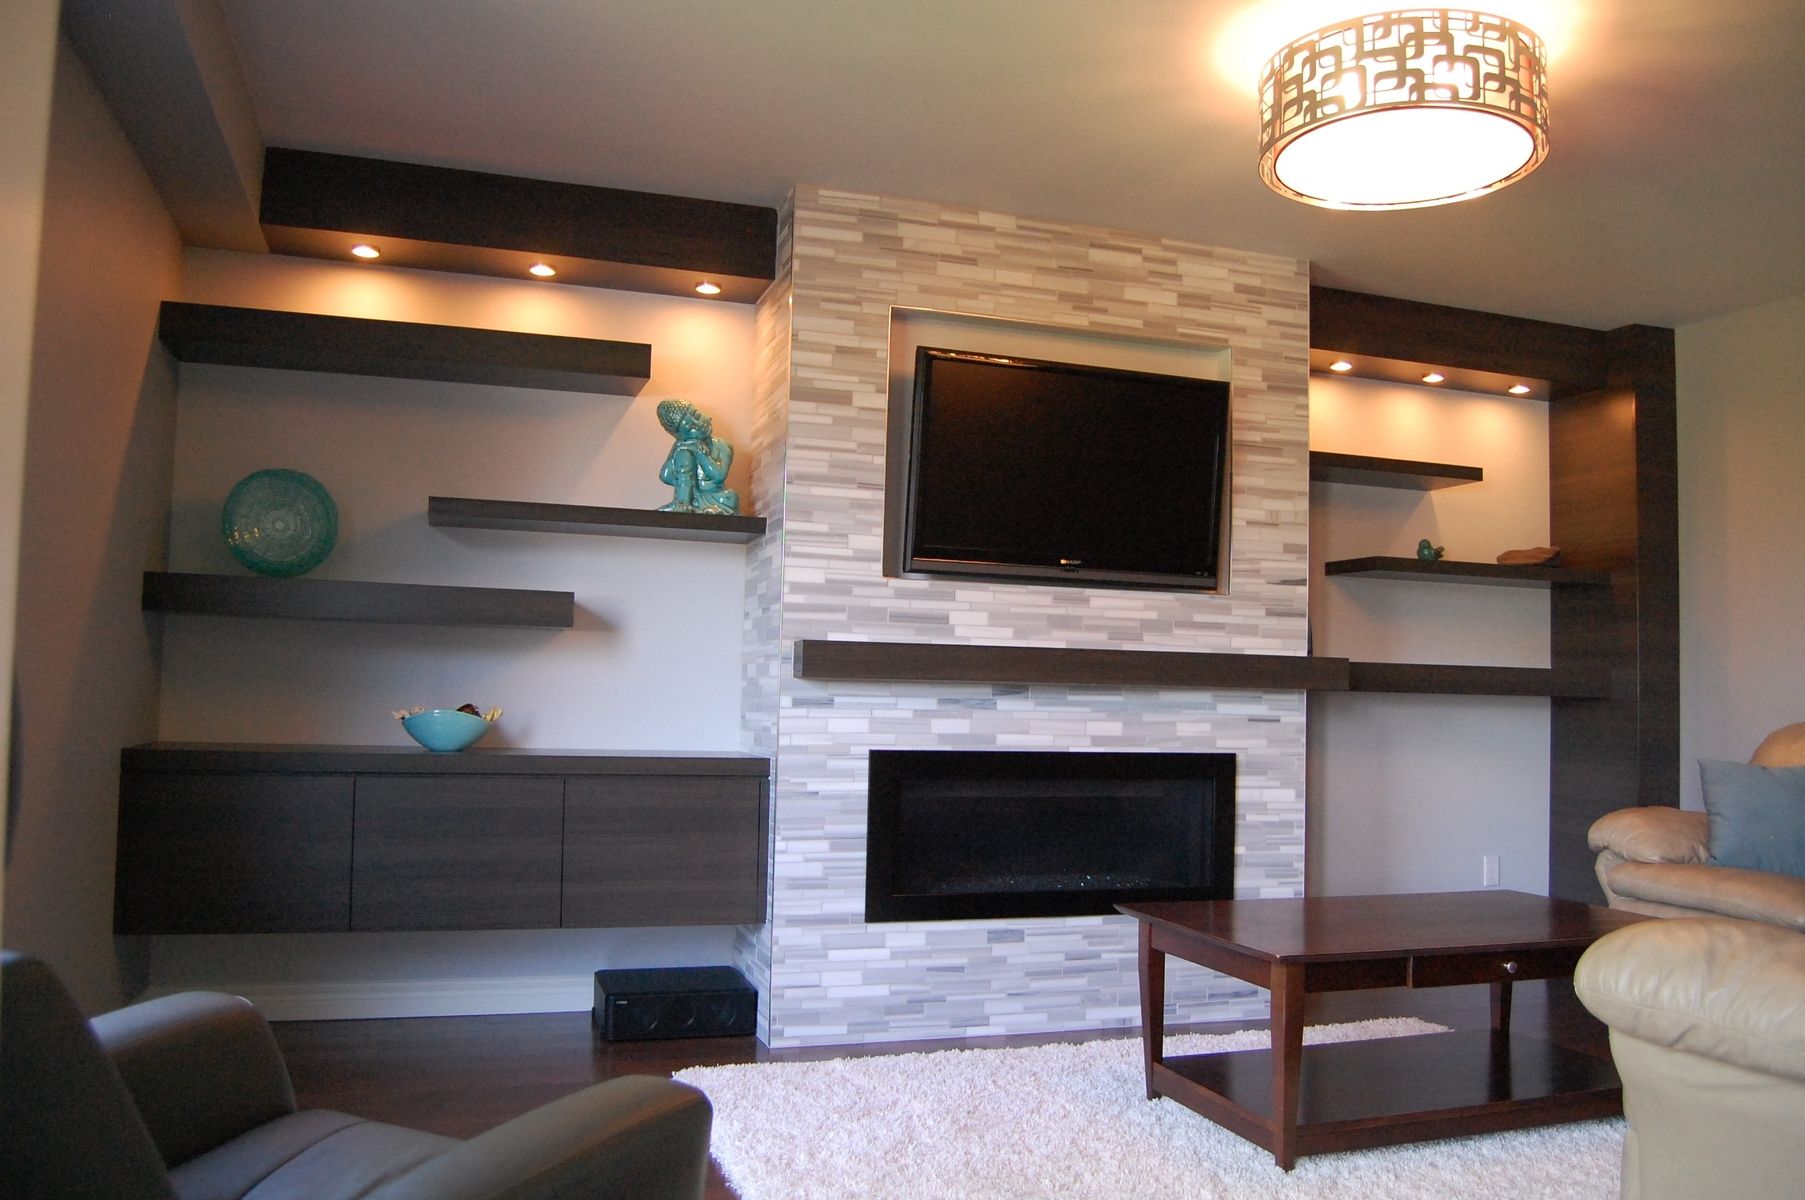 65 Inch Tv Stand with Fireplace Awesome Custom Modern Wall Unit Made Pletely From A Printed